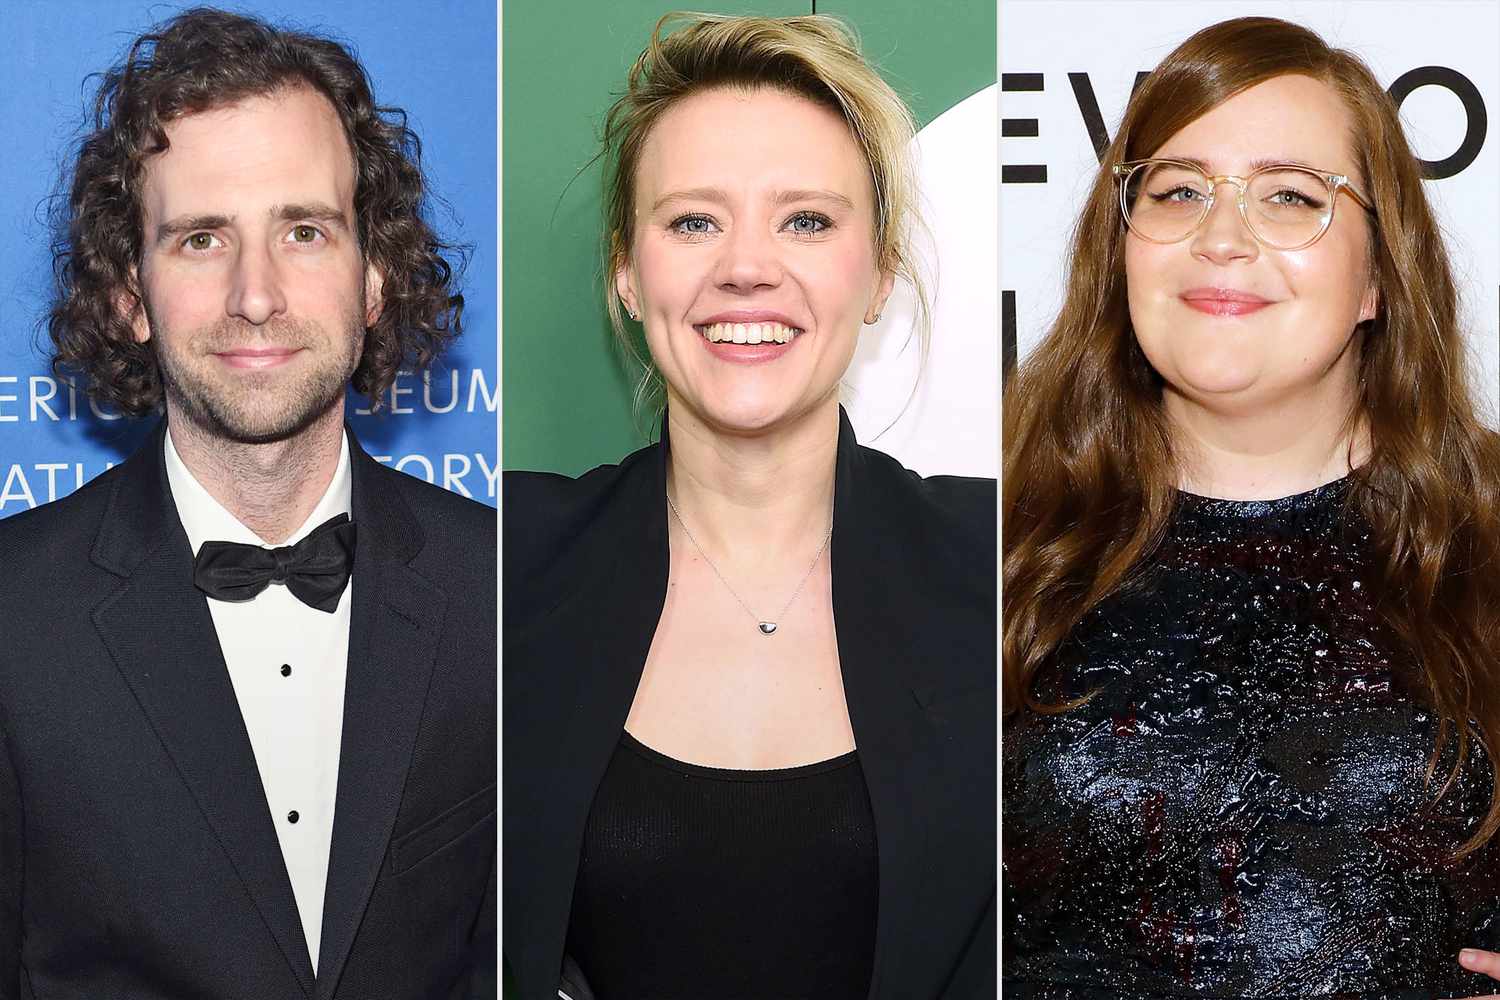 Kyle Mooney attends the American Museum Of Natural History 2019 Gala at the American Museum of Natural History on November 21, 2019 in New York City. (Photo by Jamie McCarthy/Getty Images); Kate McKinnon attends Hulu's "Shrill" New York Premiere at Walter Reade Theater on March 13, 2019 in New York City. (Photo by Jamie McCarthy/Getty Images); NEW YORK, NEW YORK - NOVEMBER 19: Aidy Bryant attends the 2019 New York Public Radio Gala at The Plaza on November 19, 2019 in New York City. (Photo by Taylor Hill/Getty Images for New York Public Radio)